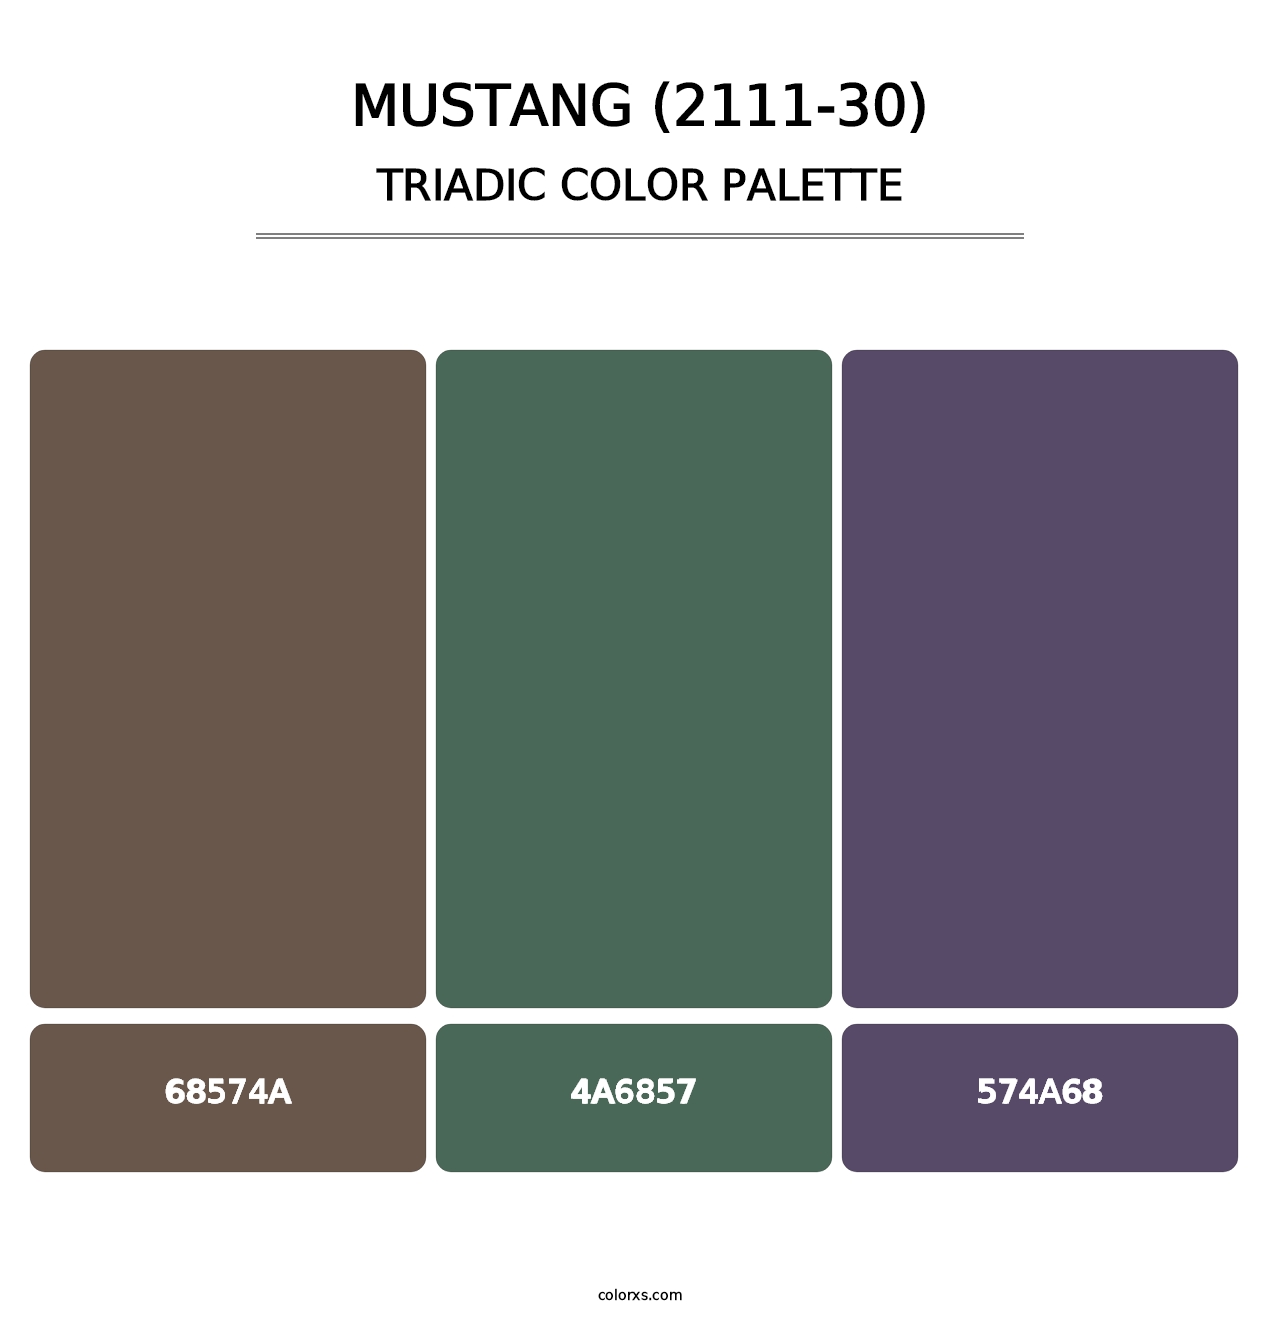 Mustang (2111-30) - Triadic Color Palette